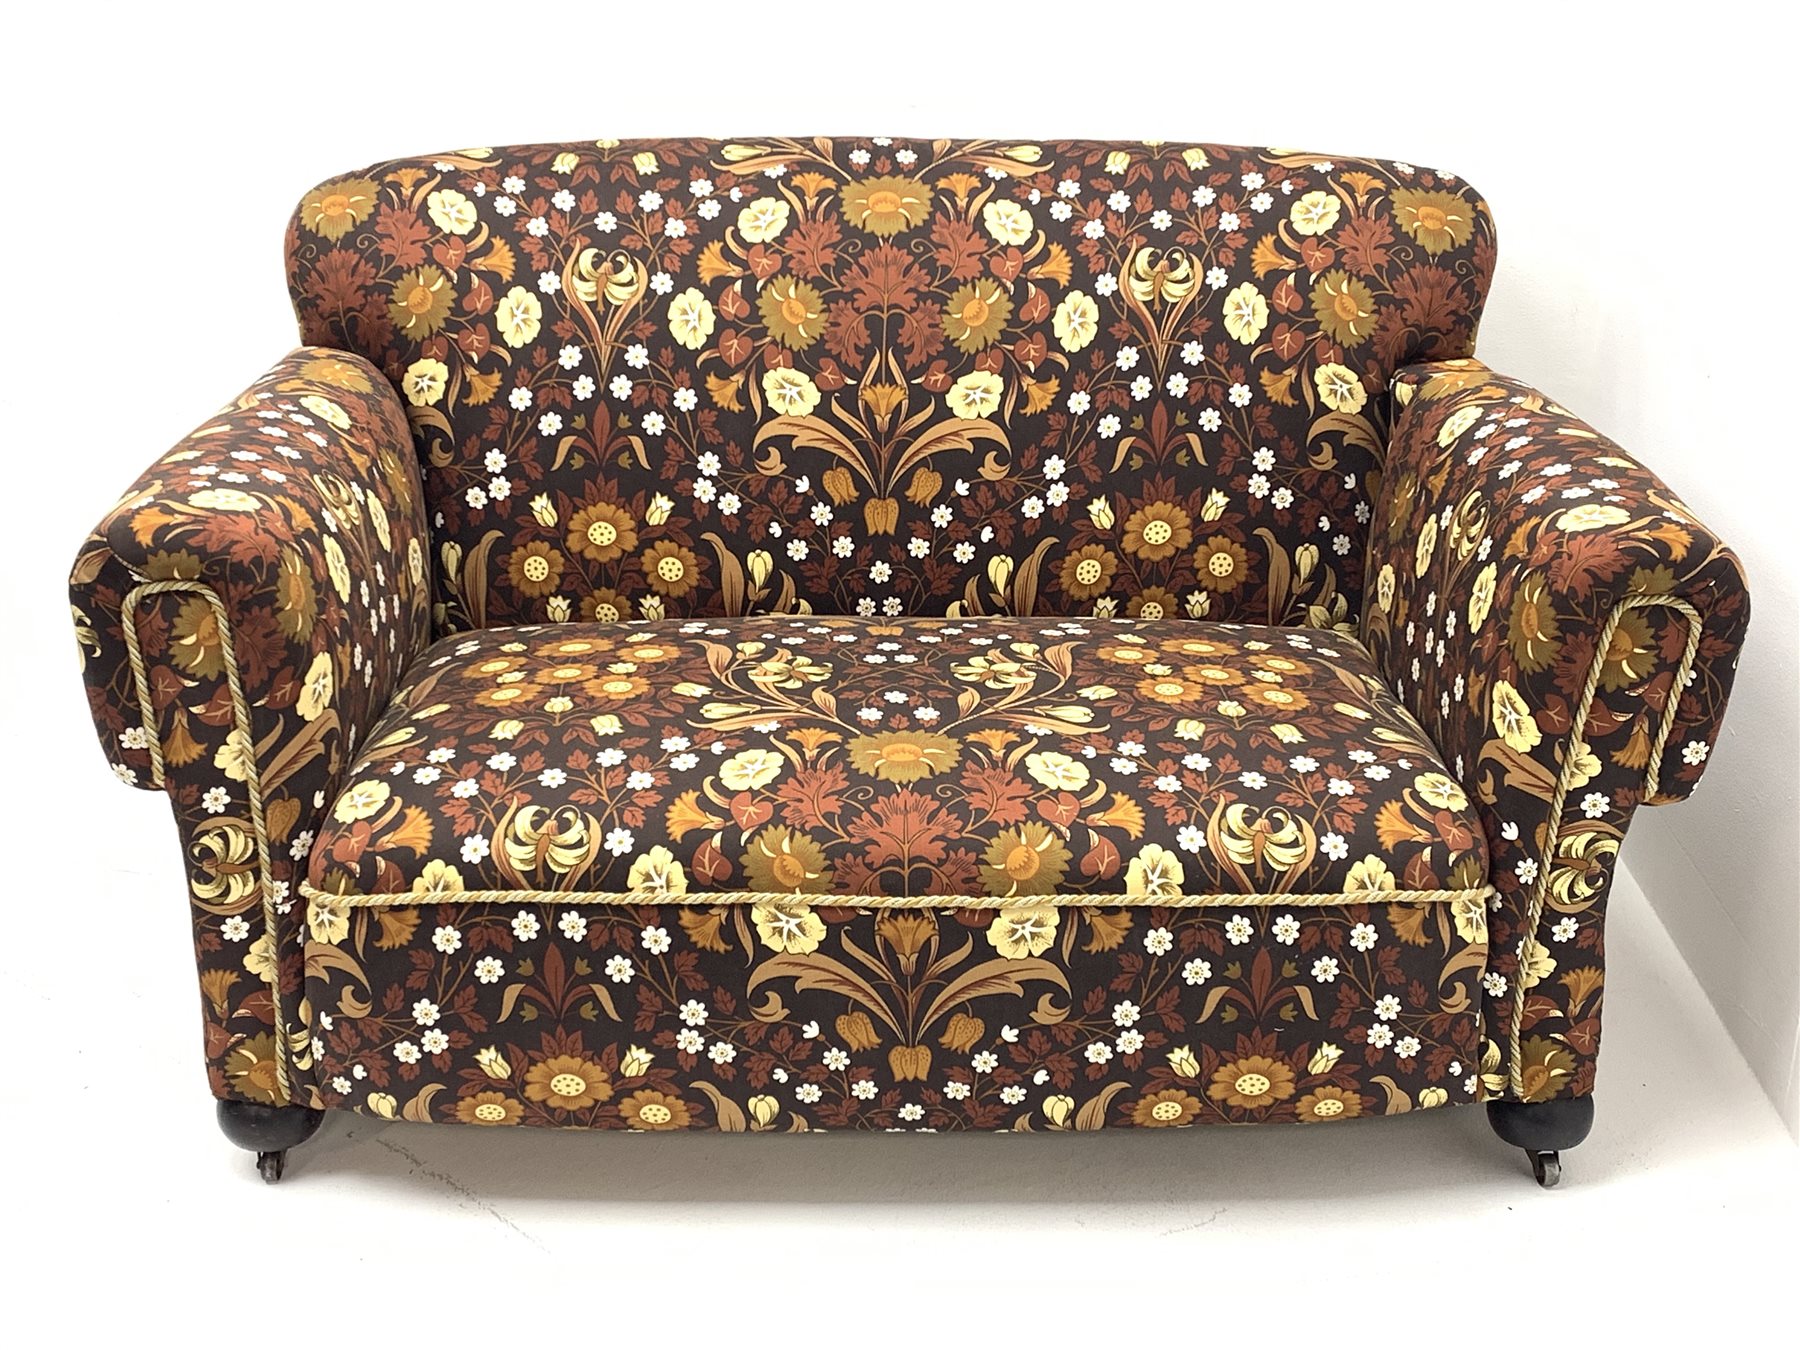 Early 20th century two seat drop end settee upholstered in Willam Morris style patterned fabric, tur - Image 2 of 4